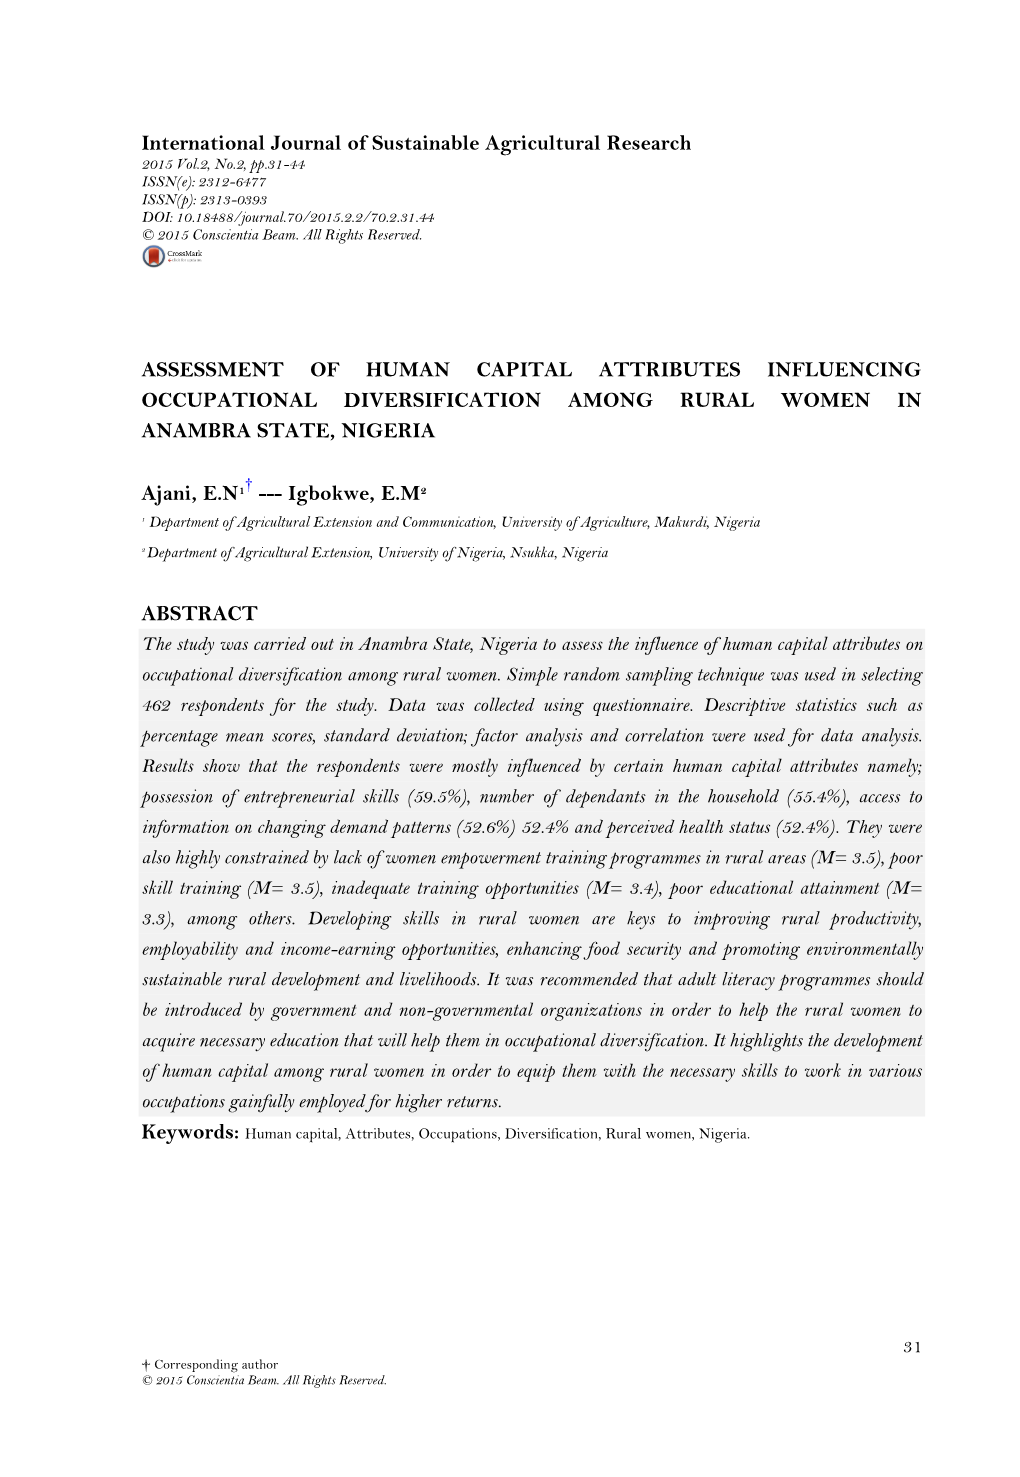 Assessment of Human Capital Attributes Influencing Occupational Diversification Among Rural Women in Anambra State, Nigeria